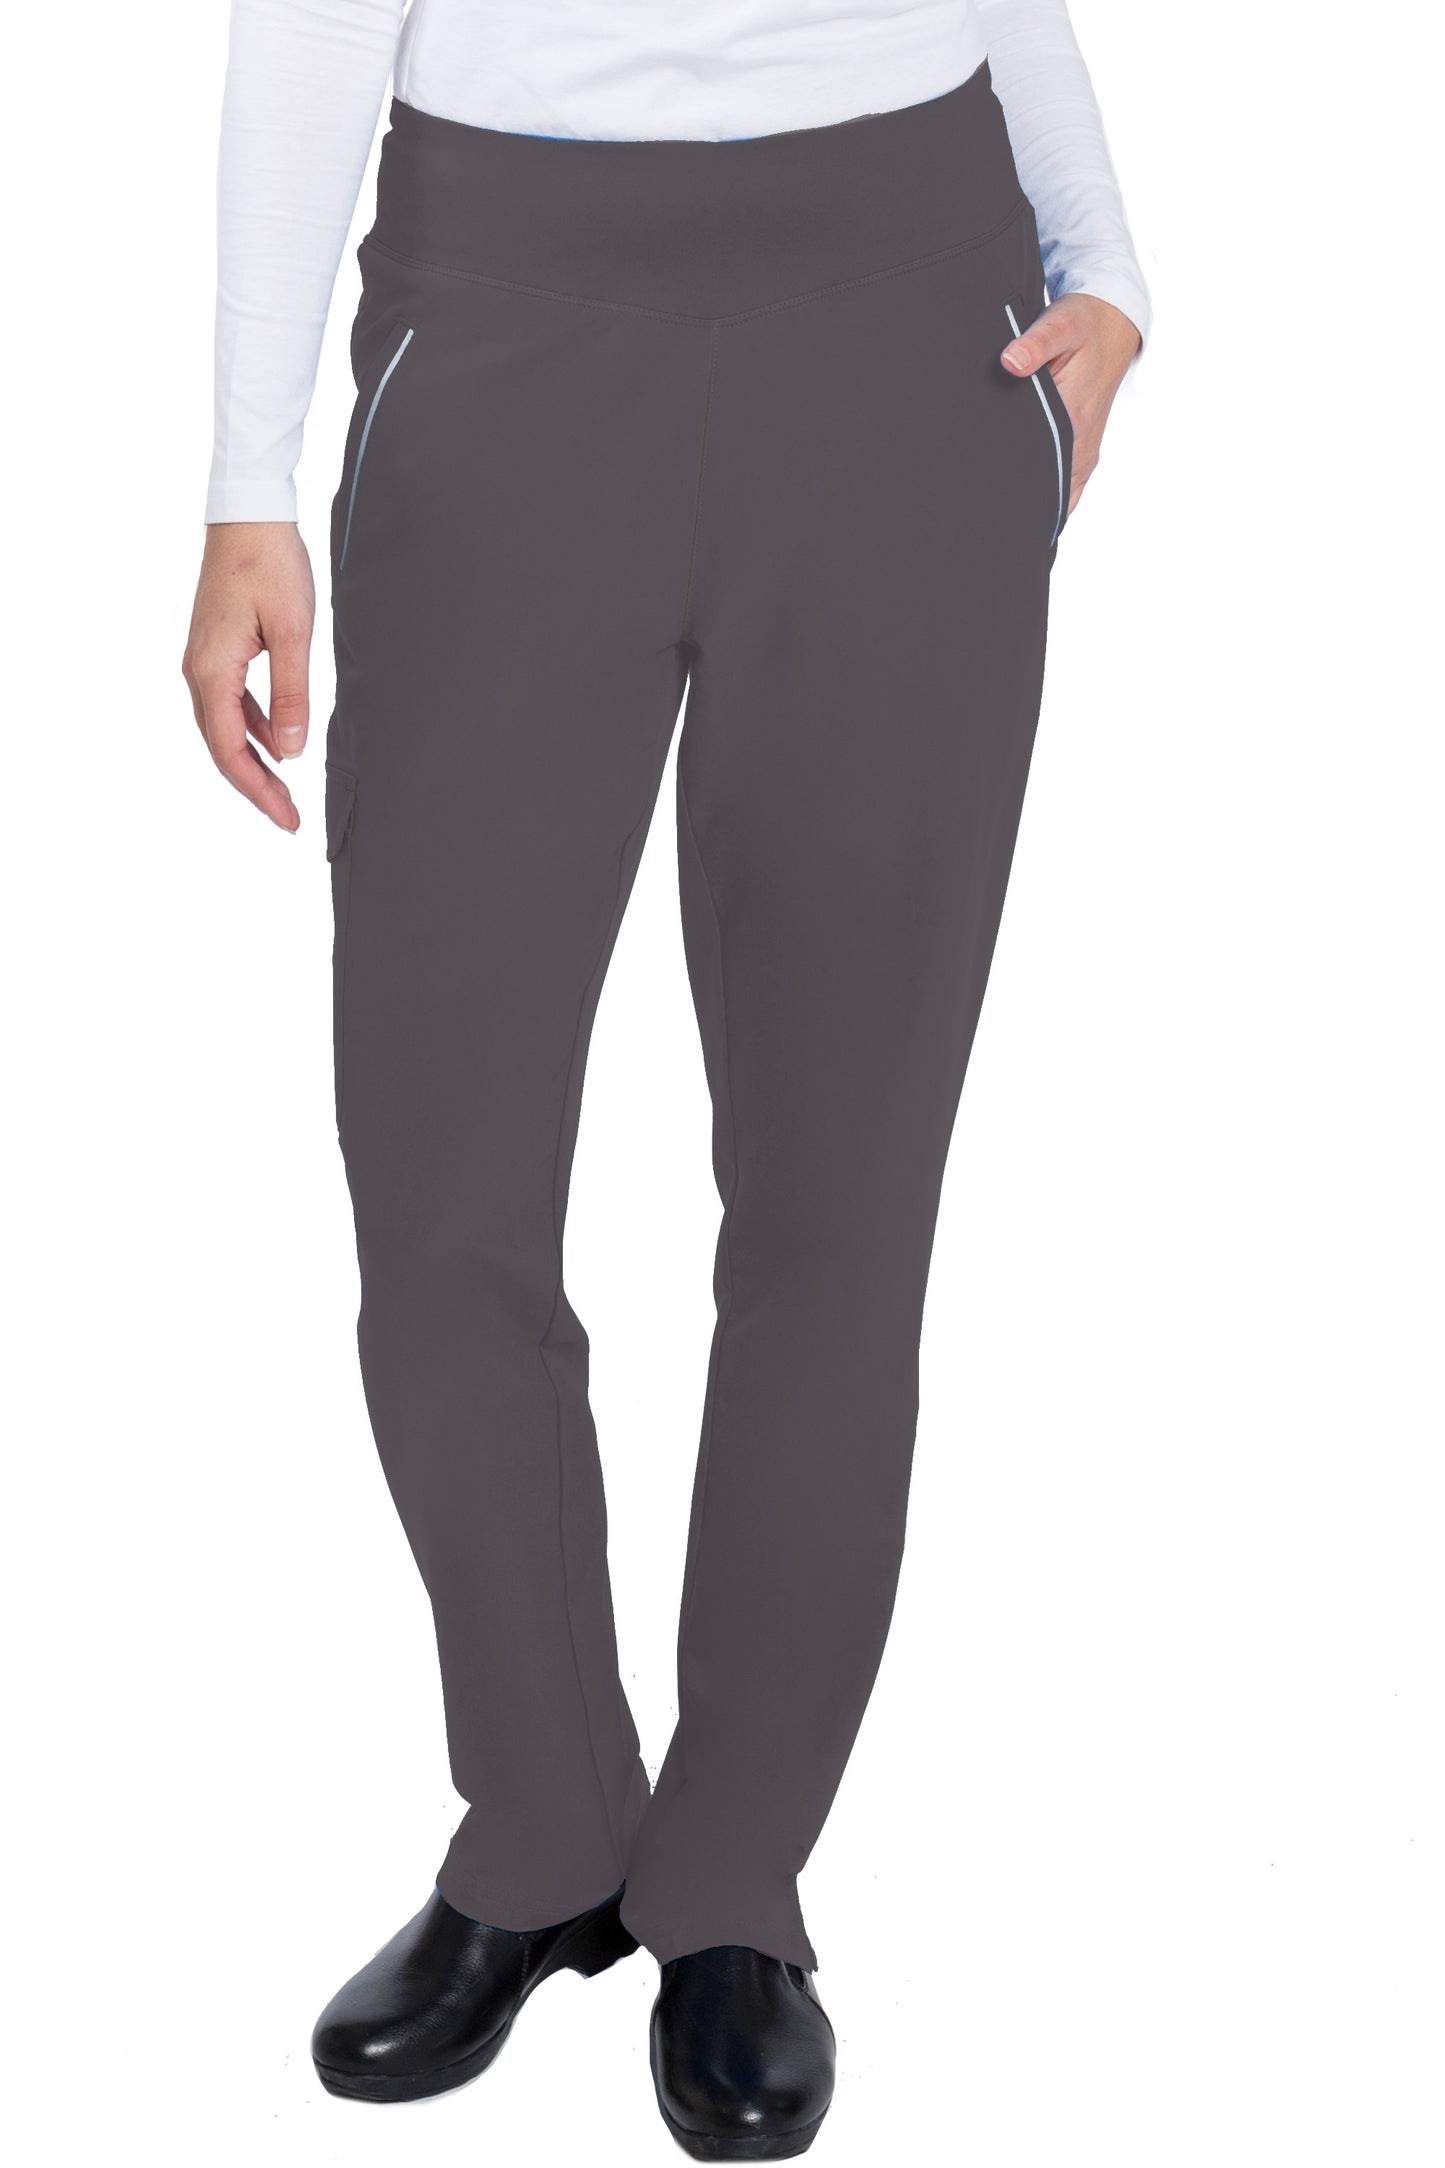 Healing Hands HH360 Naomi Yoga Waist Petite Scrub Pant in Pewter at Parker's Clothing and Shoes.